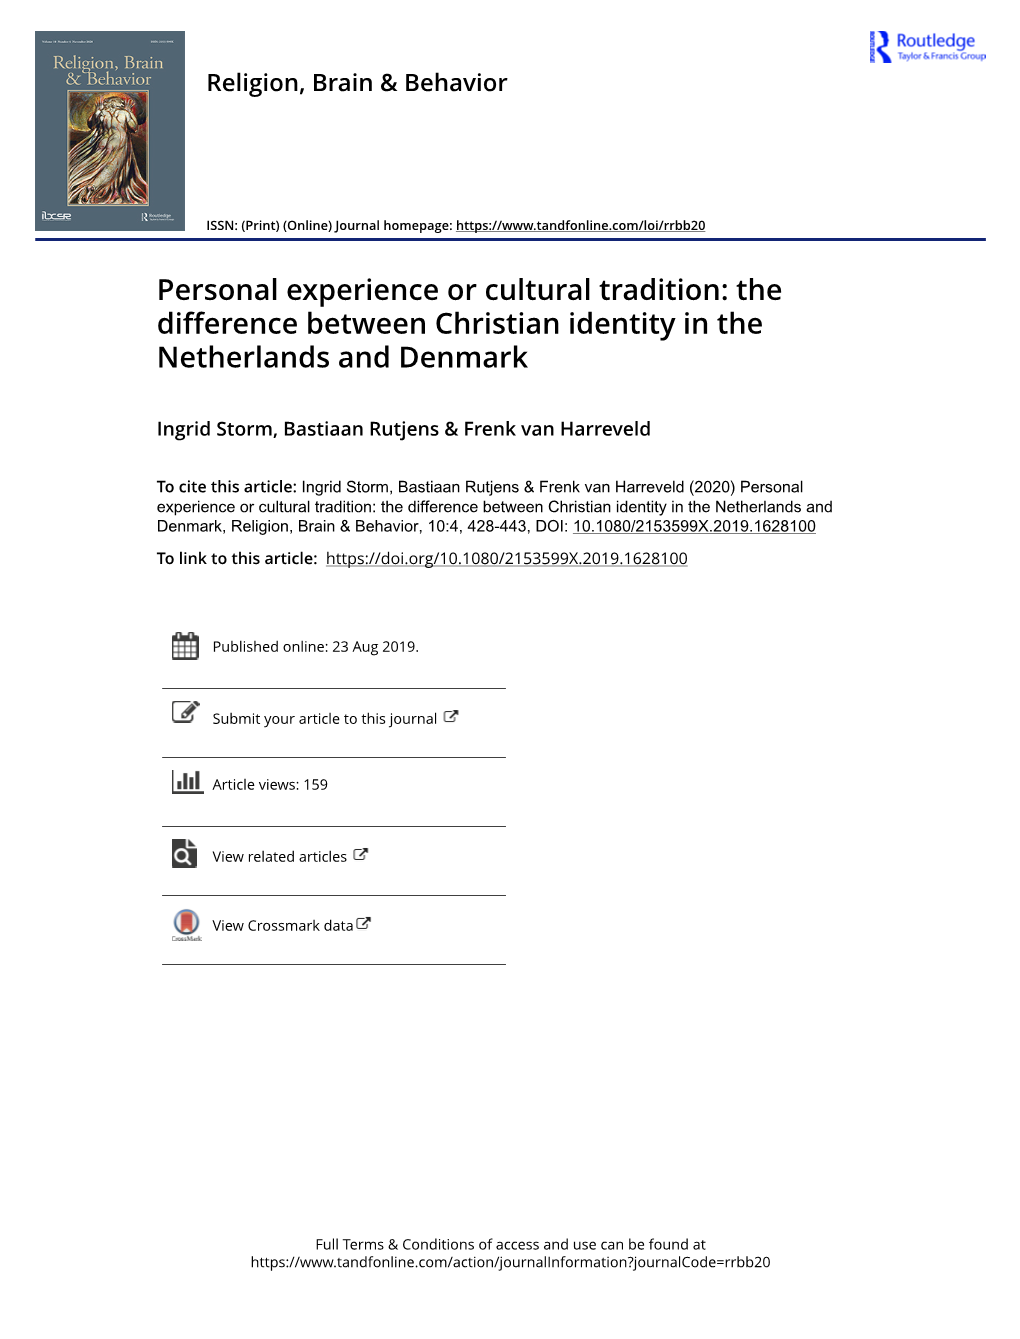 Personal Experience Or Cultural Tradition: the Difference Between Christian Identity in the Netherlands and Denmark